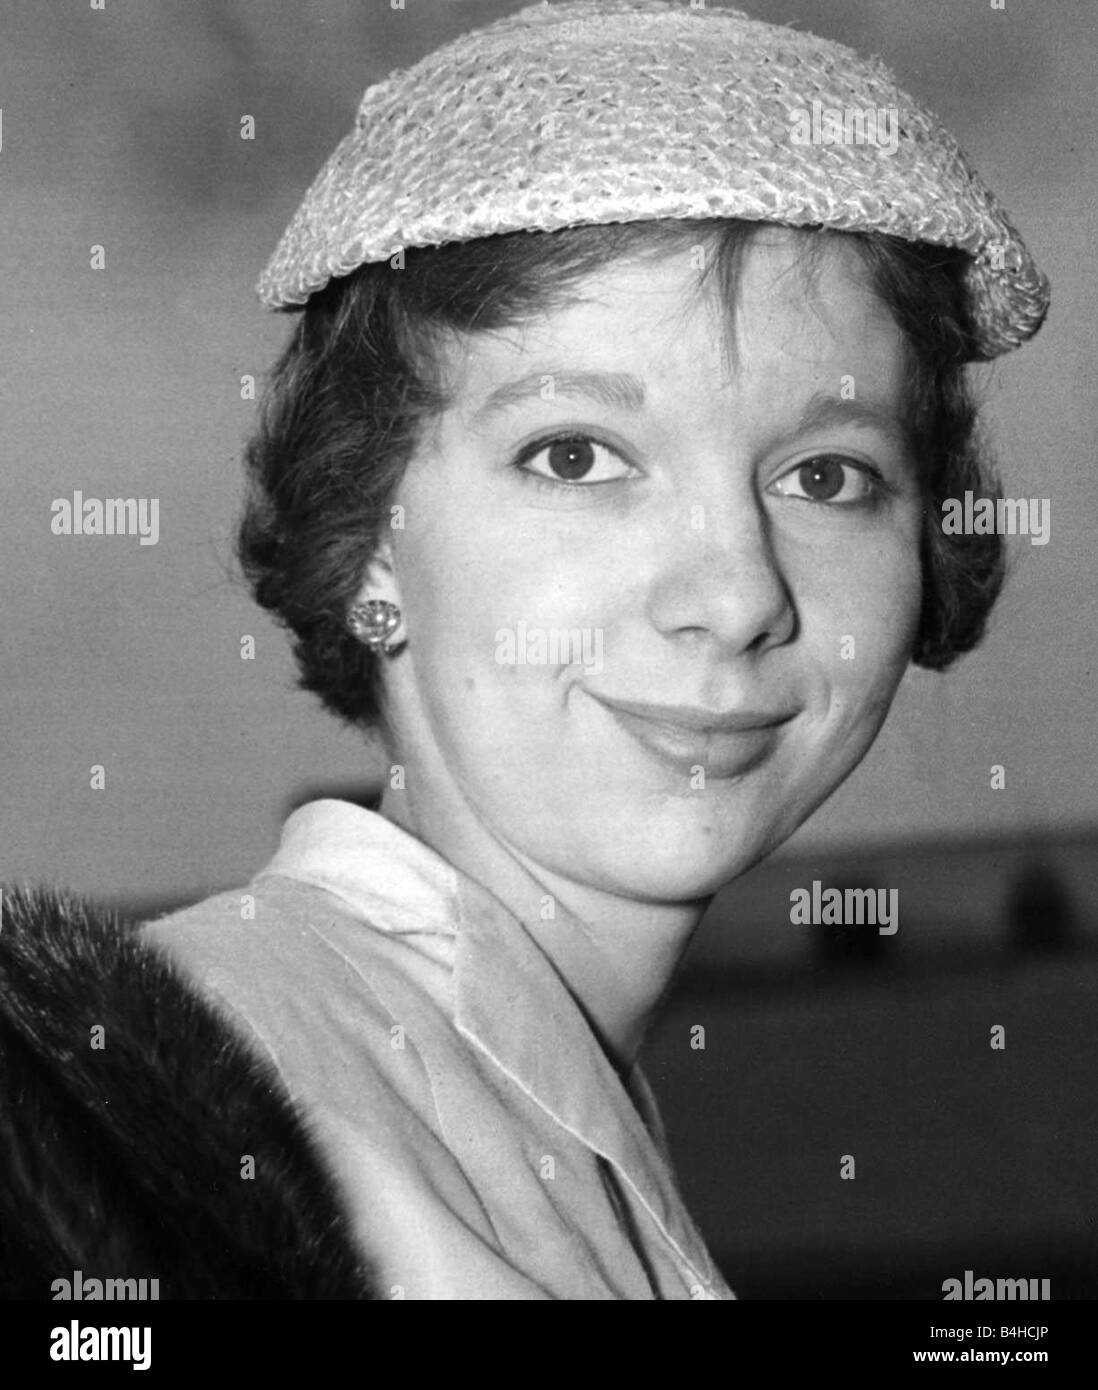 Actress Anna Massey seen here arriving at Royal Ascot wearing a straw ...